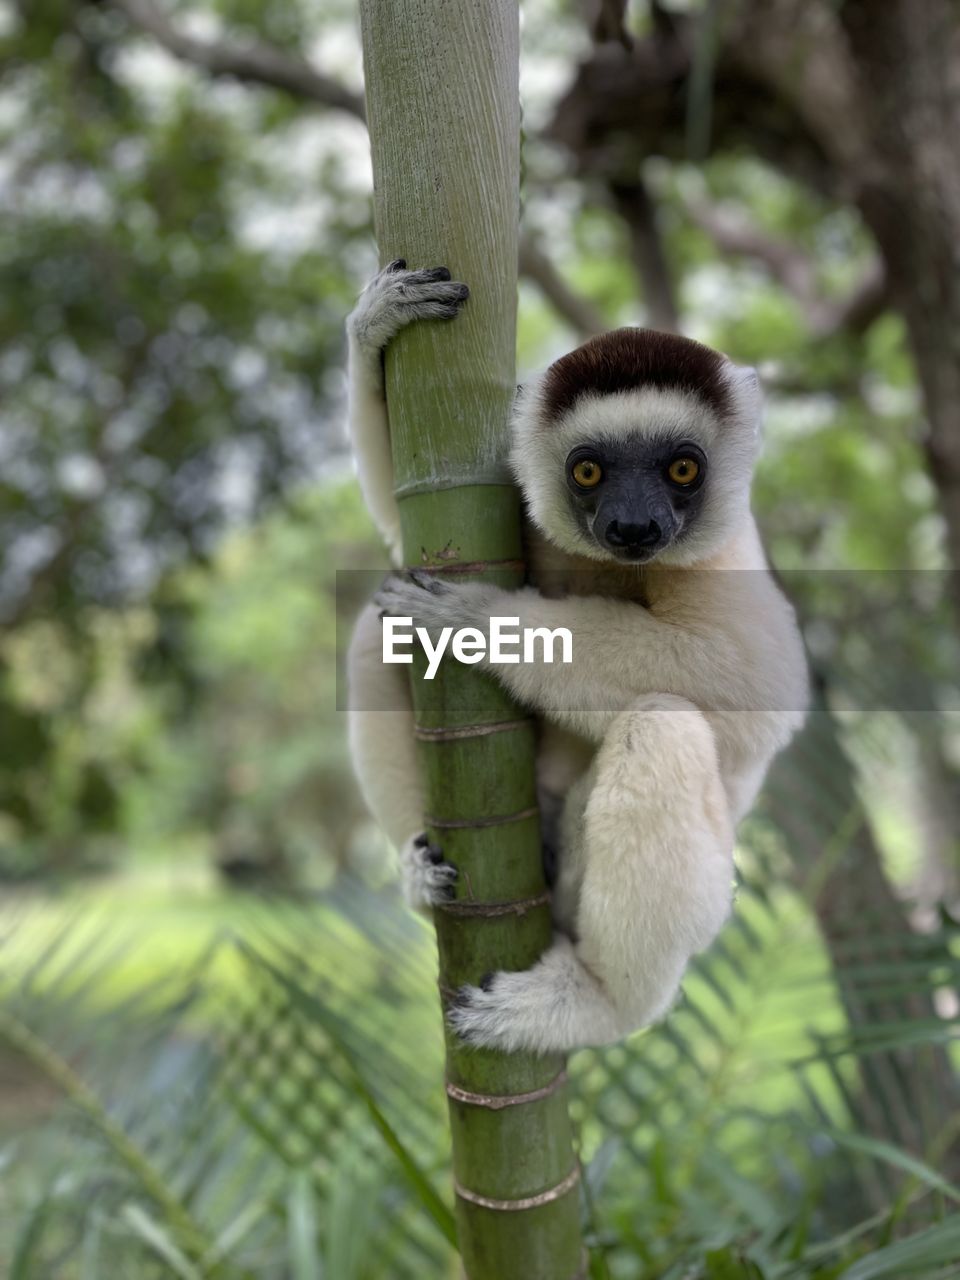 animal themes, animal, animal wildlife, tree, mammal, one animal, primate, wildlife, plant, gibbon, monkey, nature, looking at camera, portrait, new world monkey, no people, forest, branch, day, climbing, outdoors, sitting, hanging, focus on foreground, zoo, cute, full length, land, environment